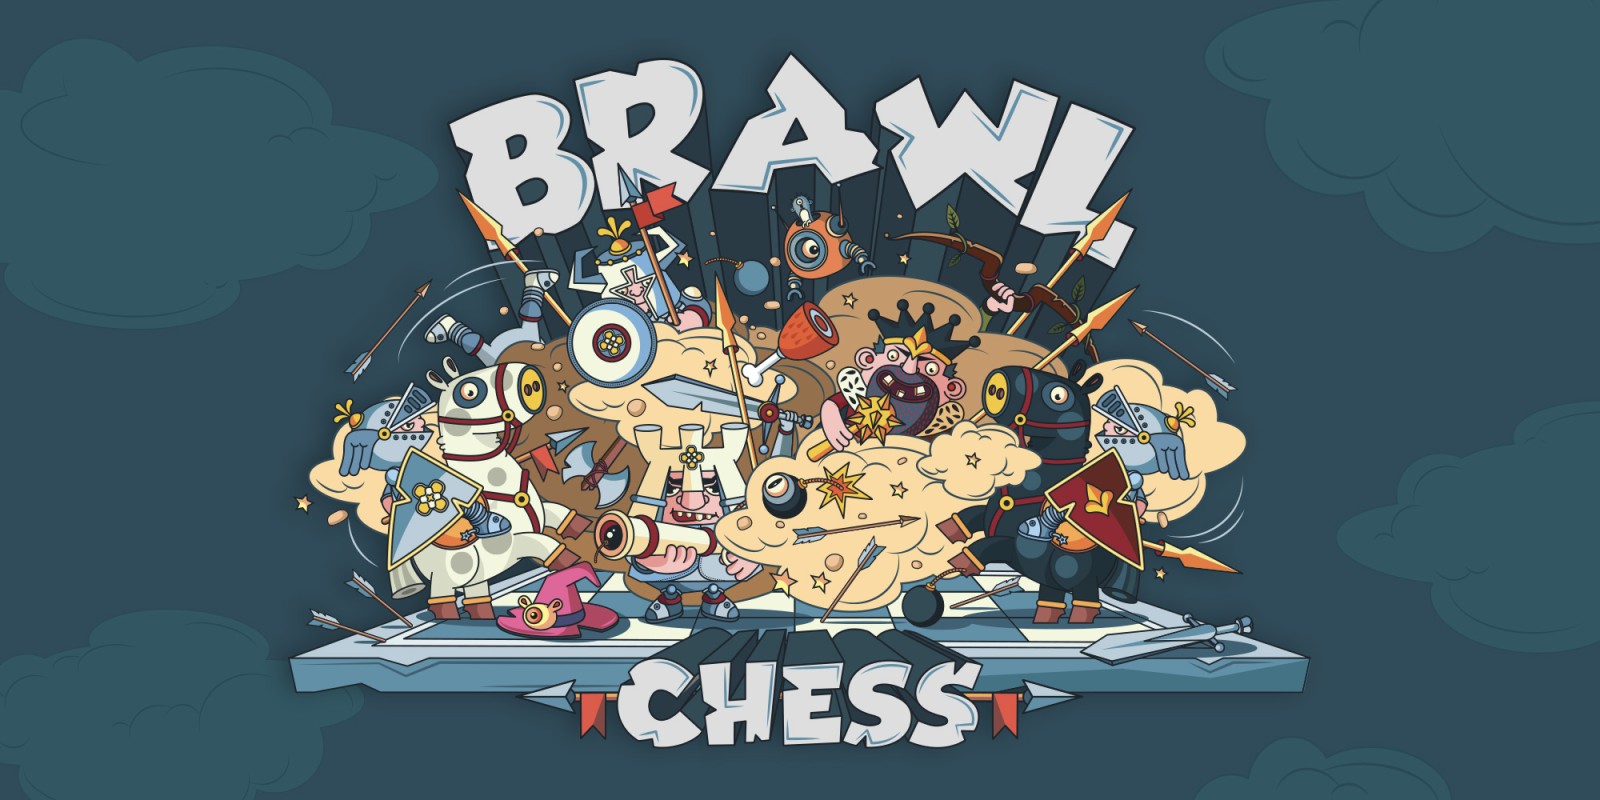 https://cdn03.nintendo-europe.com/media/images/10_share_images/games_15/nintendo_switch_download_software_1/H2x1_NSwitchDS_BrawlChess_image1600w.jpg